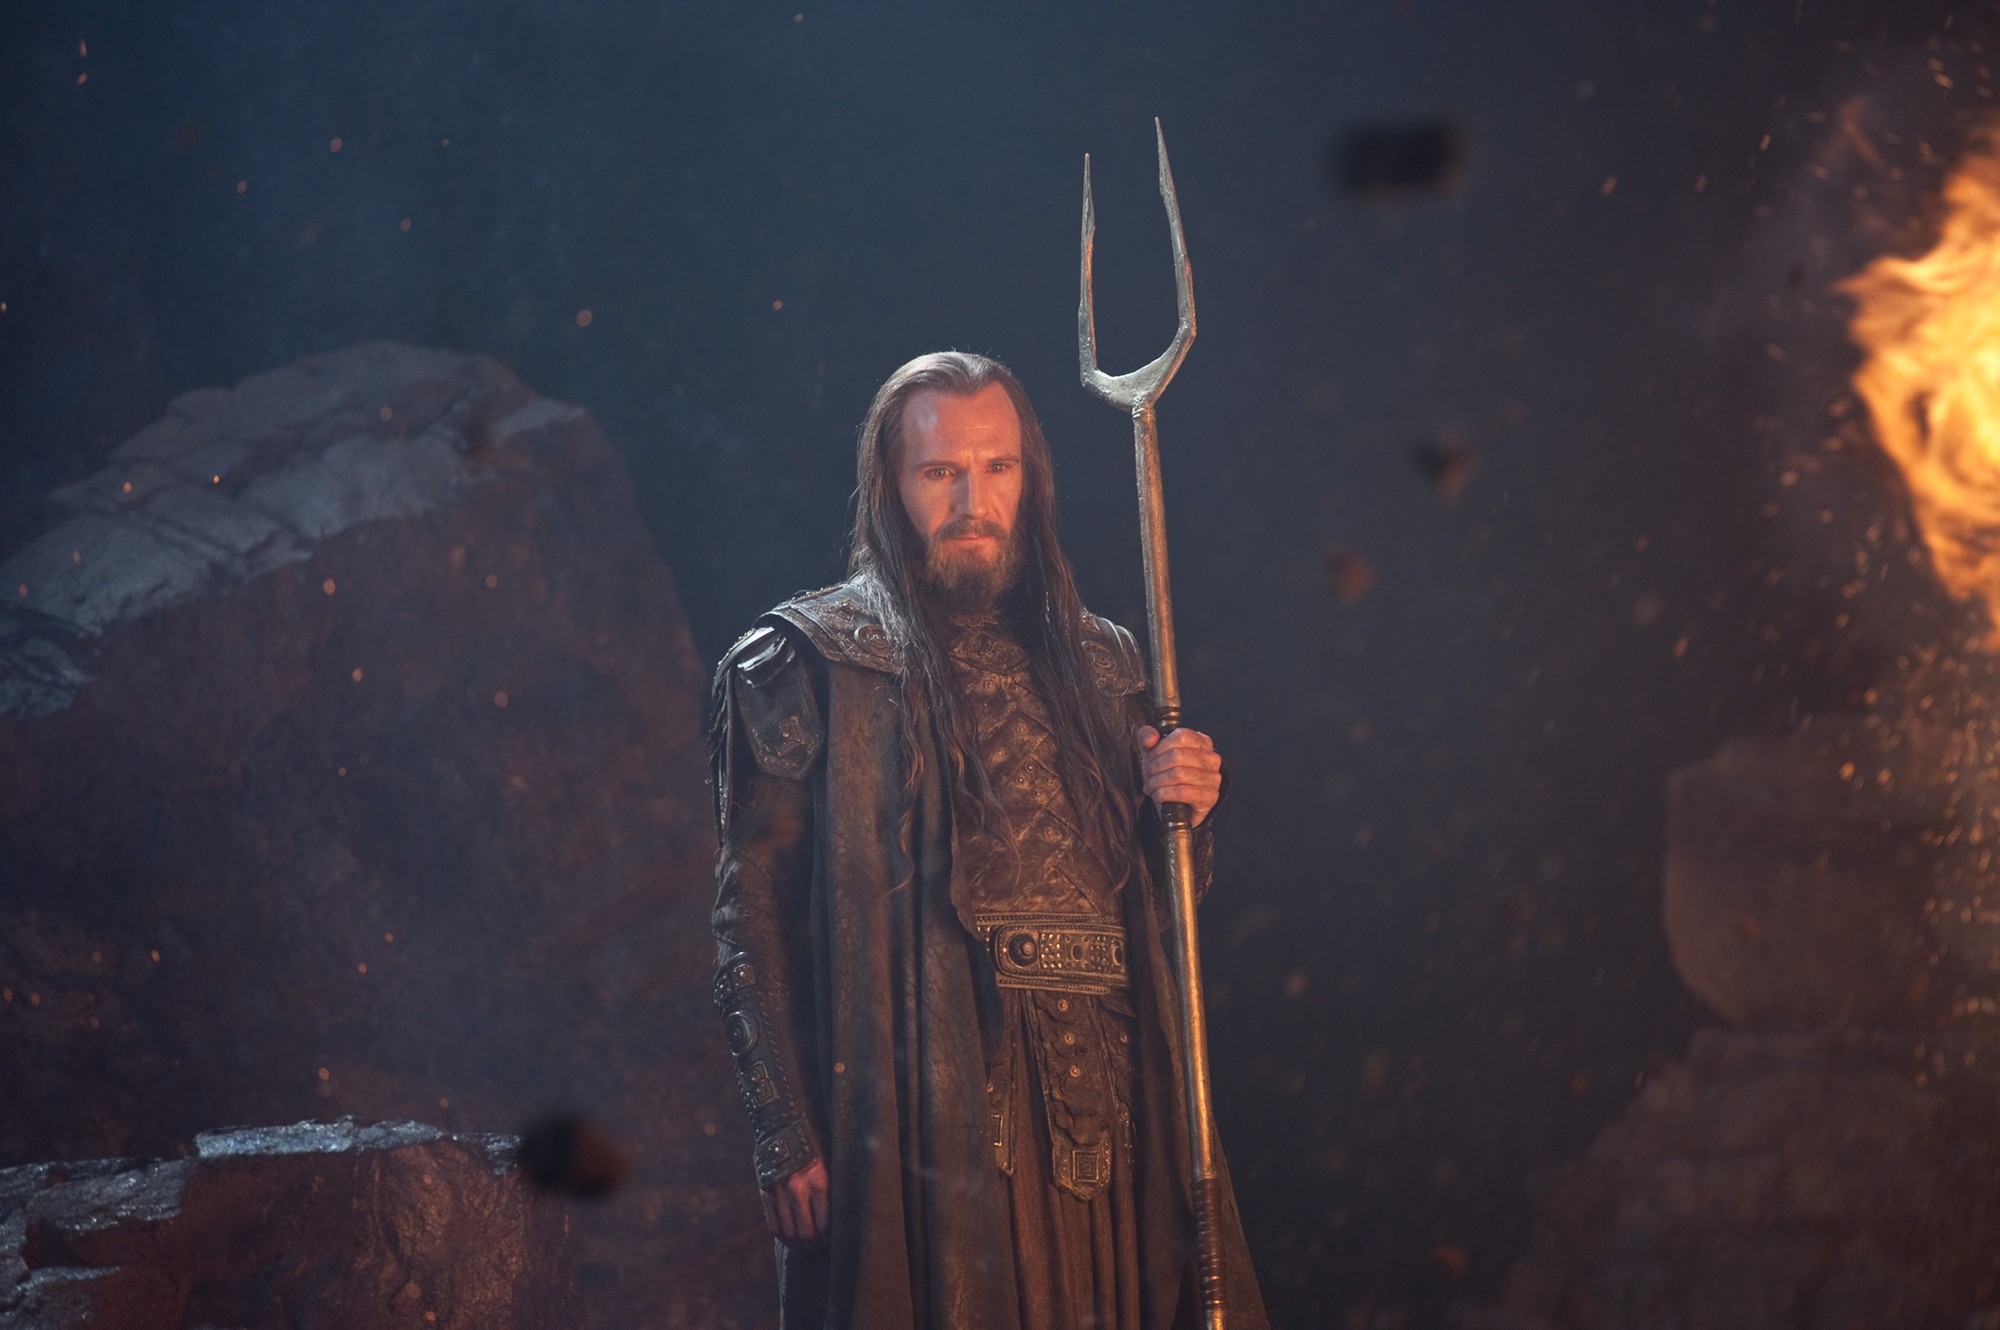 Ralph Fiennes stars as Hades in Warner Bros. Pictures' Wrath of the Titans (2012)